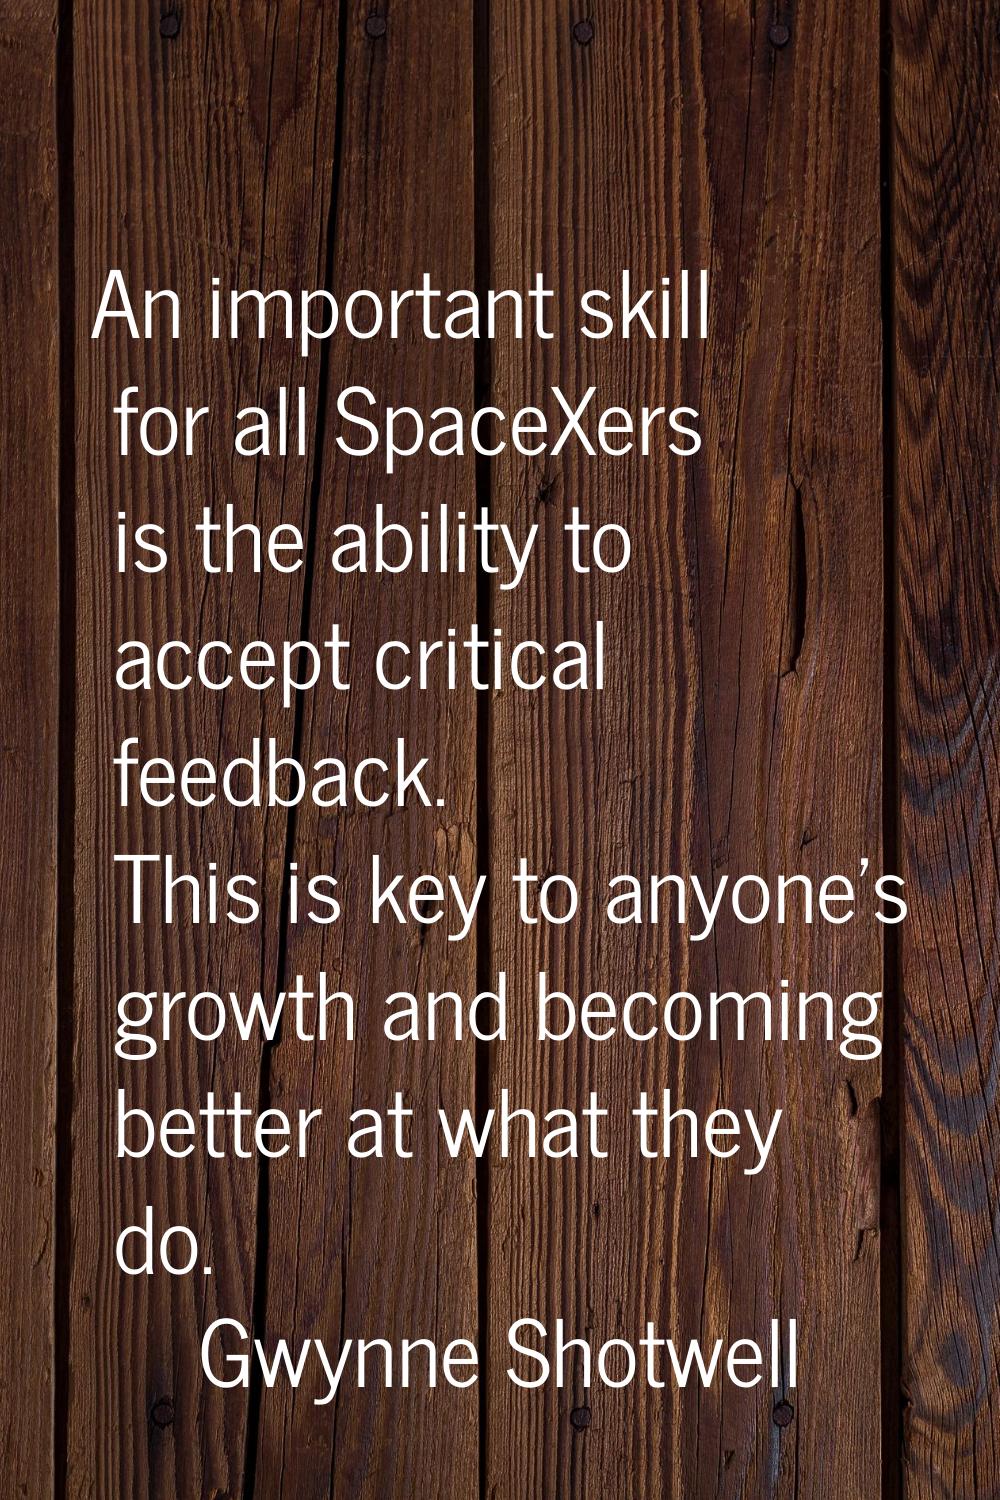 An important skill for all SpaceXers is the ability to accept critical feedback. This is key to any